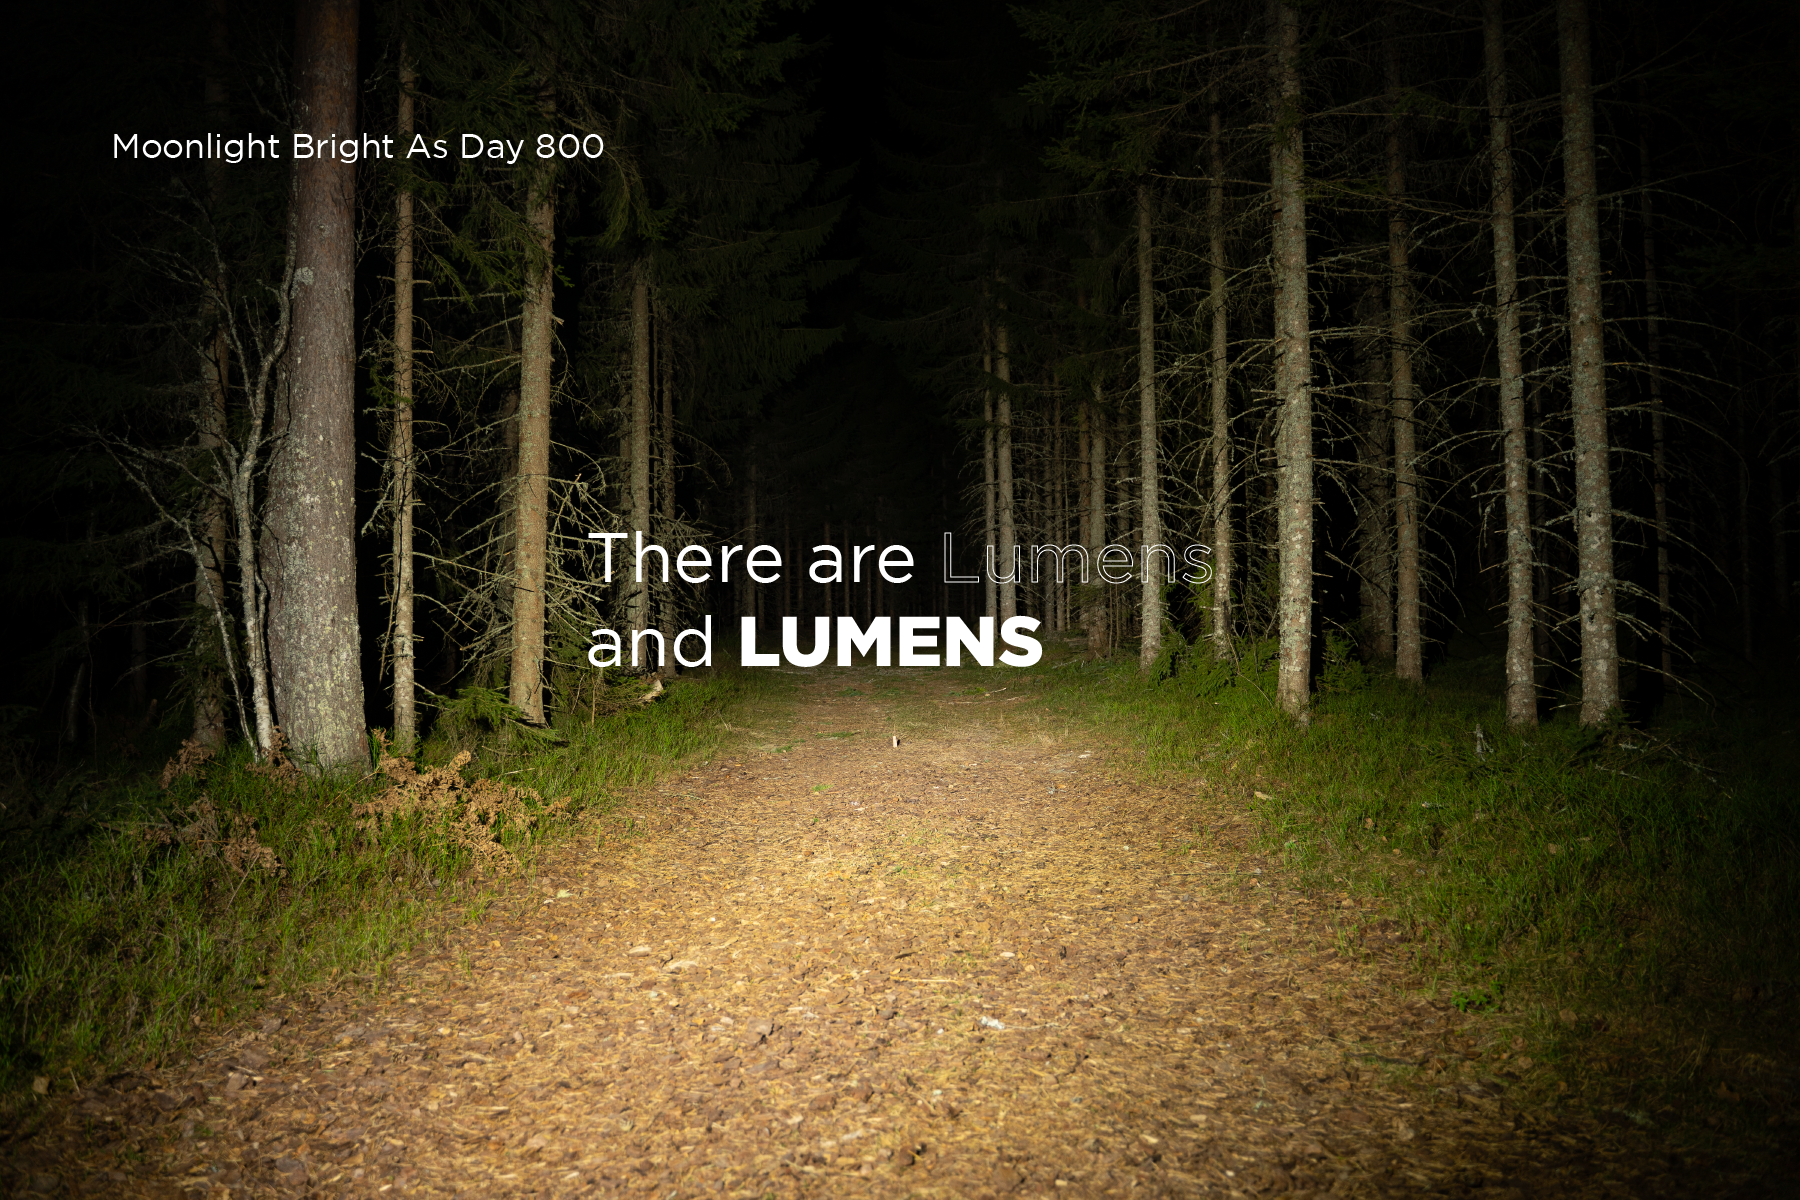 How Bright is 900 Lumens? Is 900 Lumens Bright Enough?